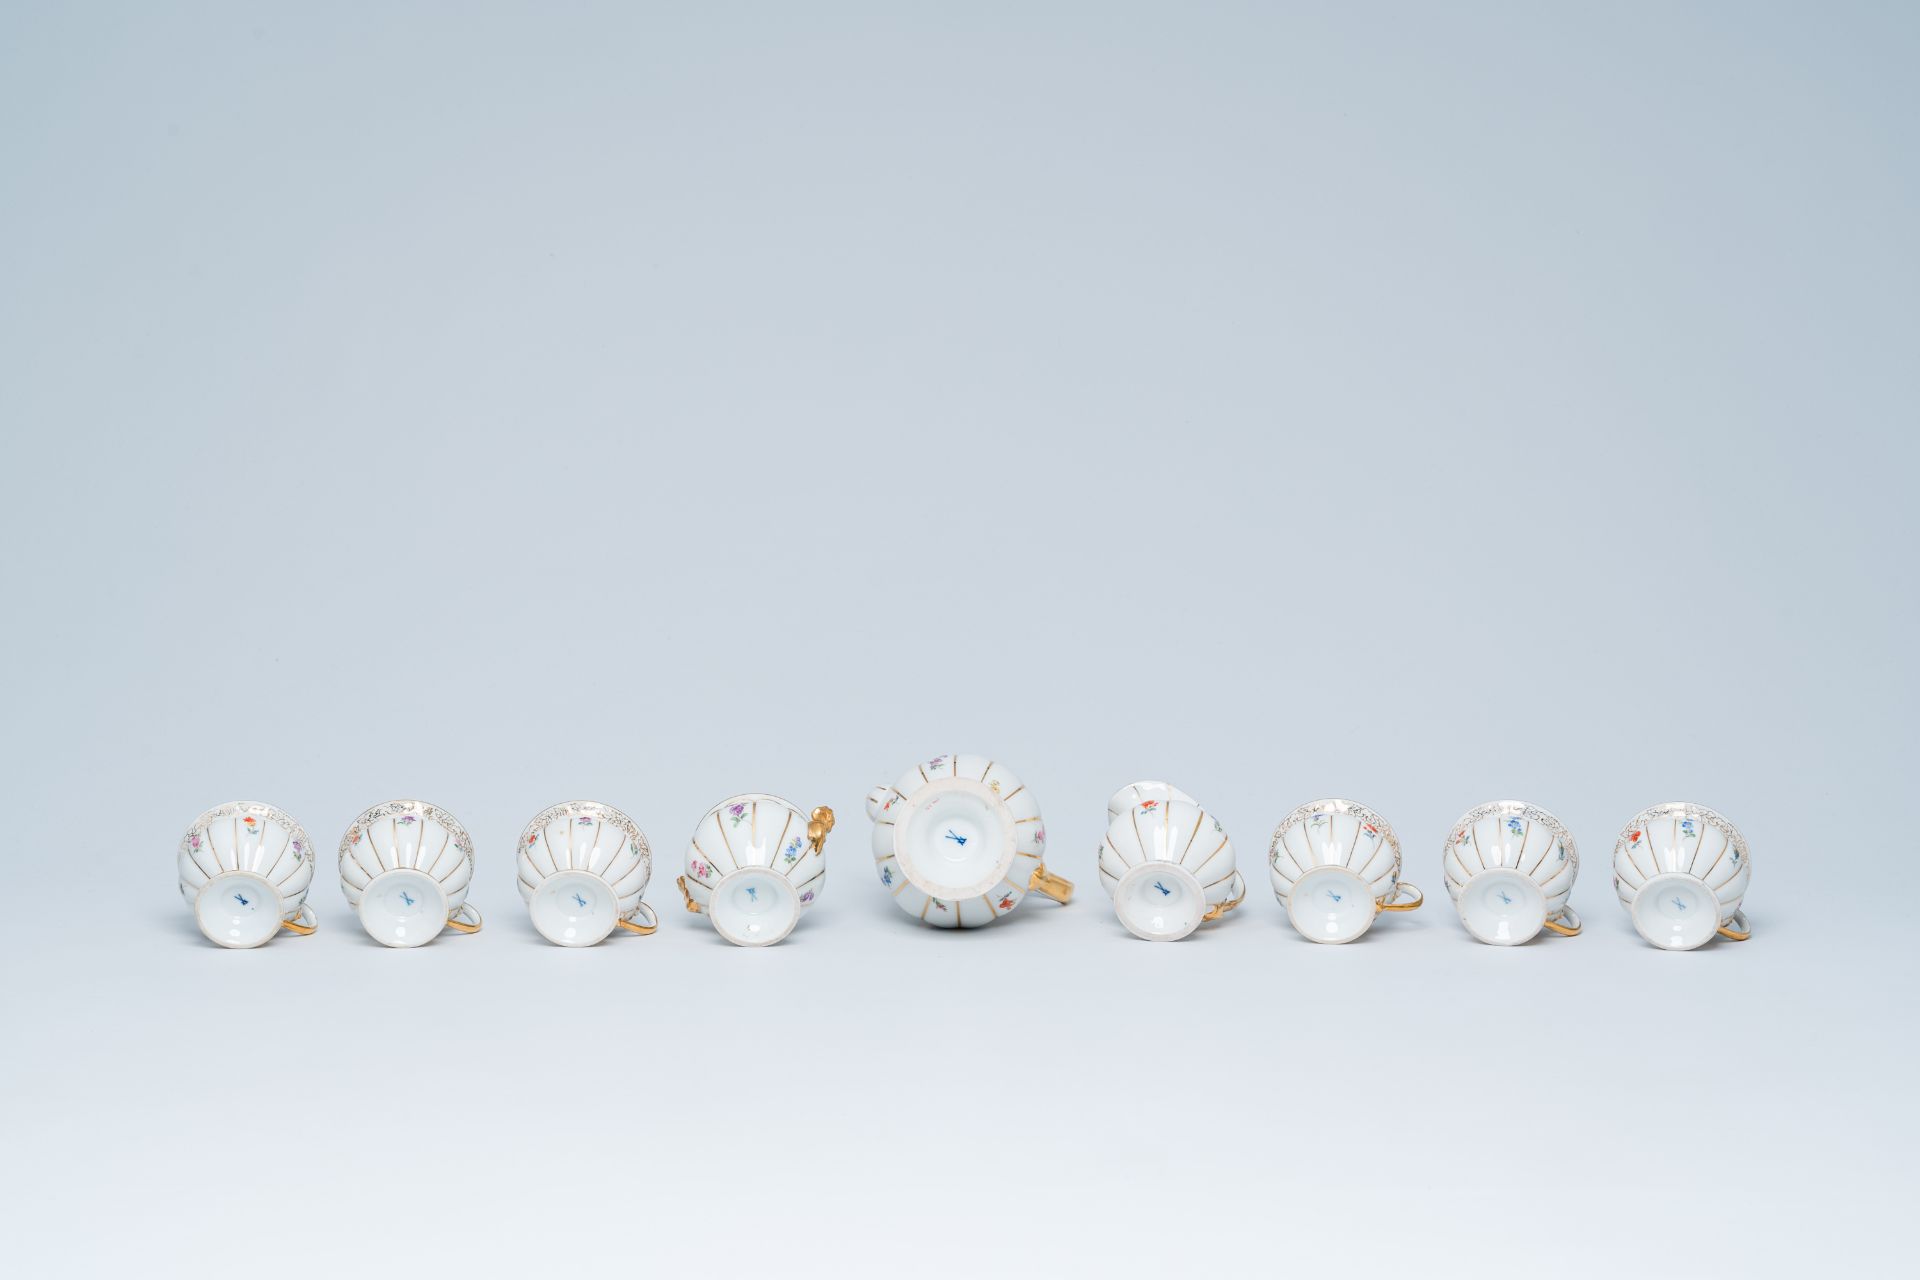 A German fifteen-piece polychrome and gilt Meissen mocha service with floral design, 20th C. - Image 10 of 10